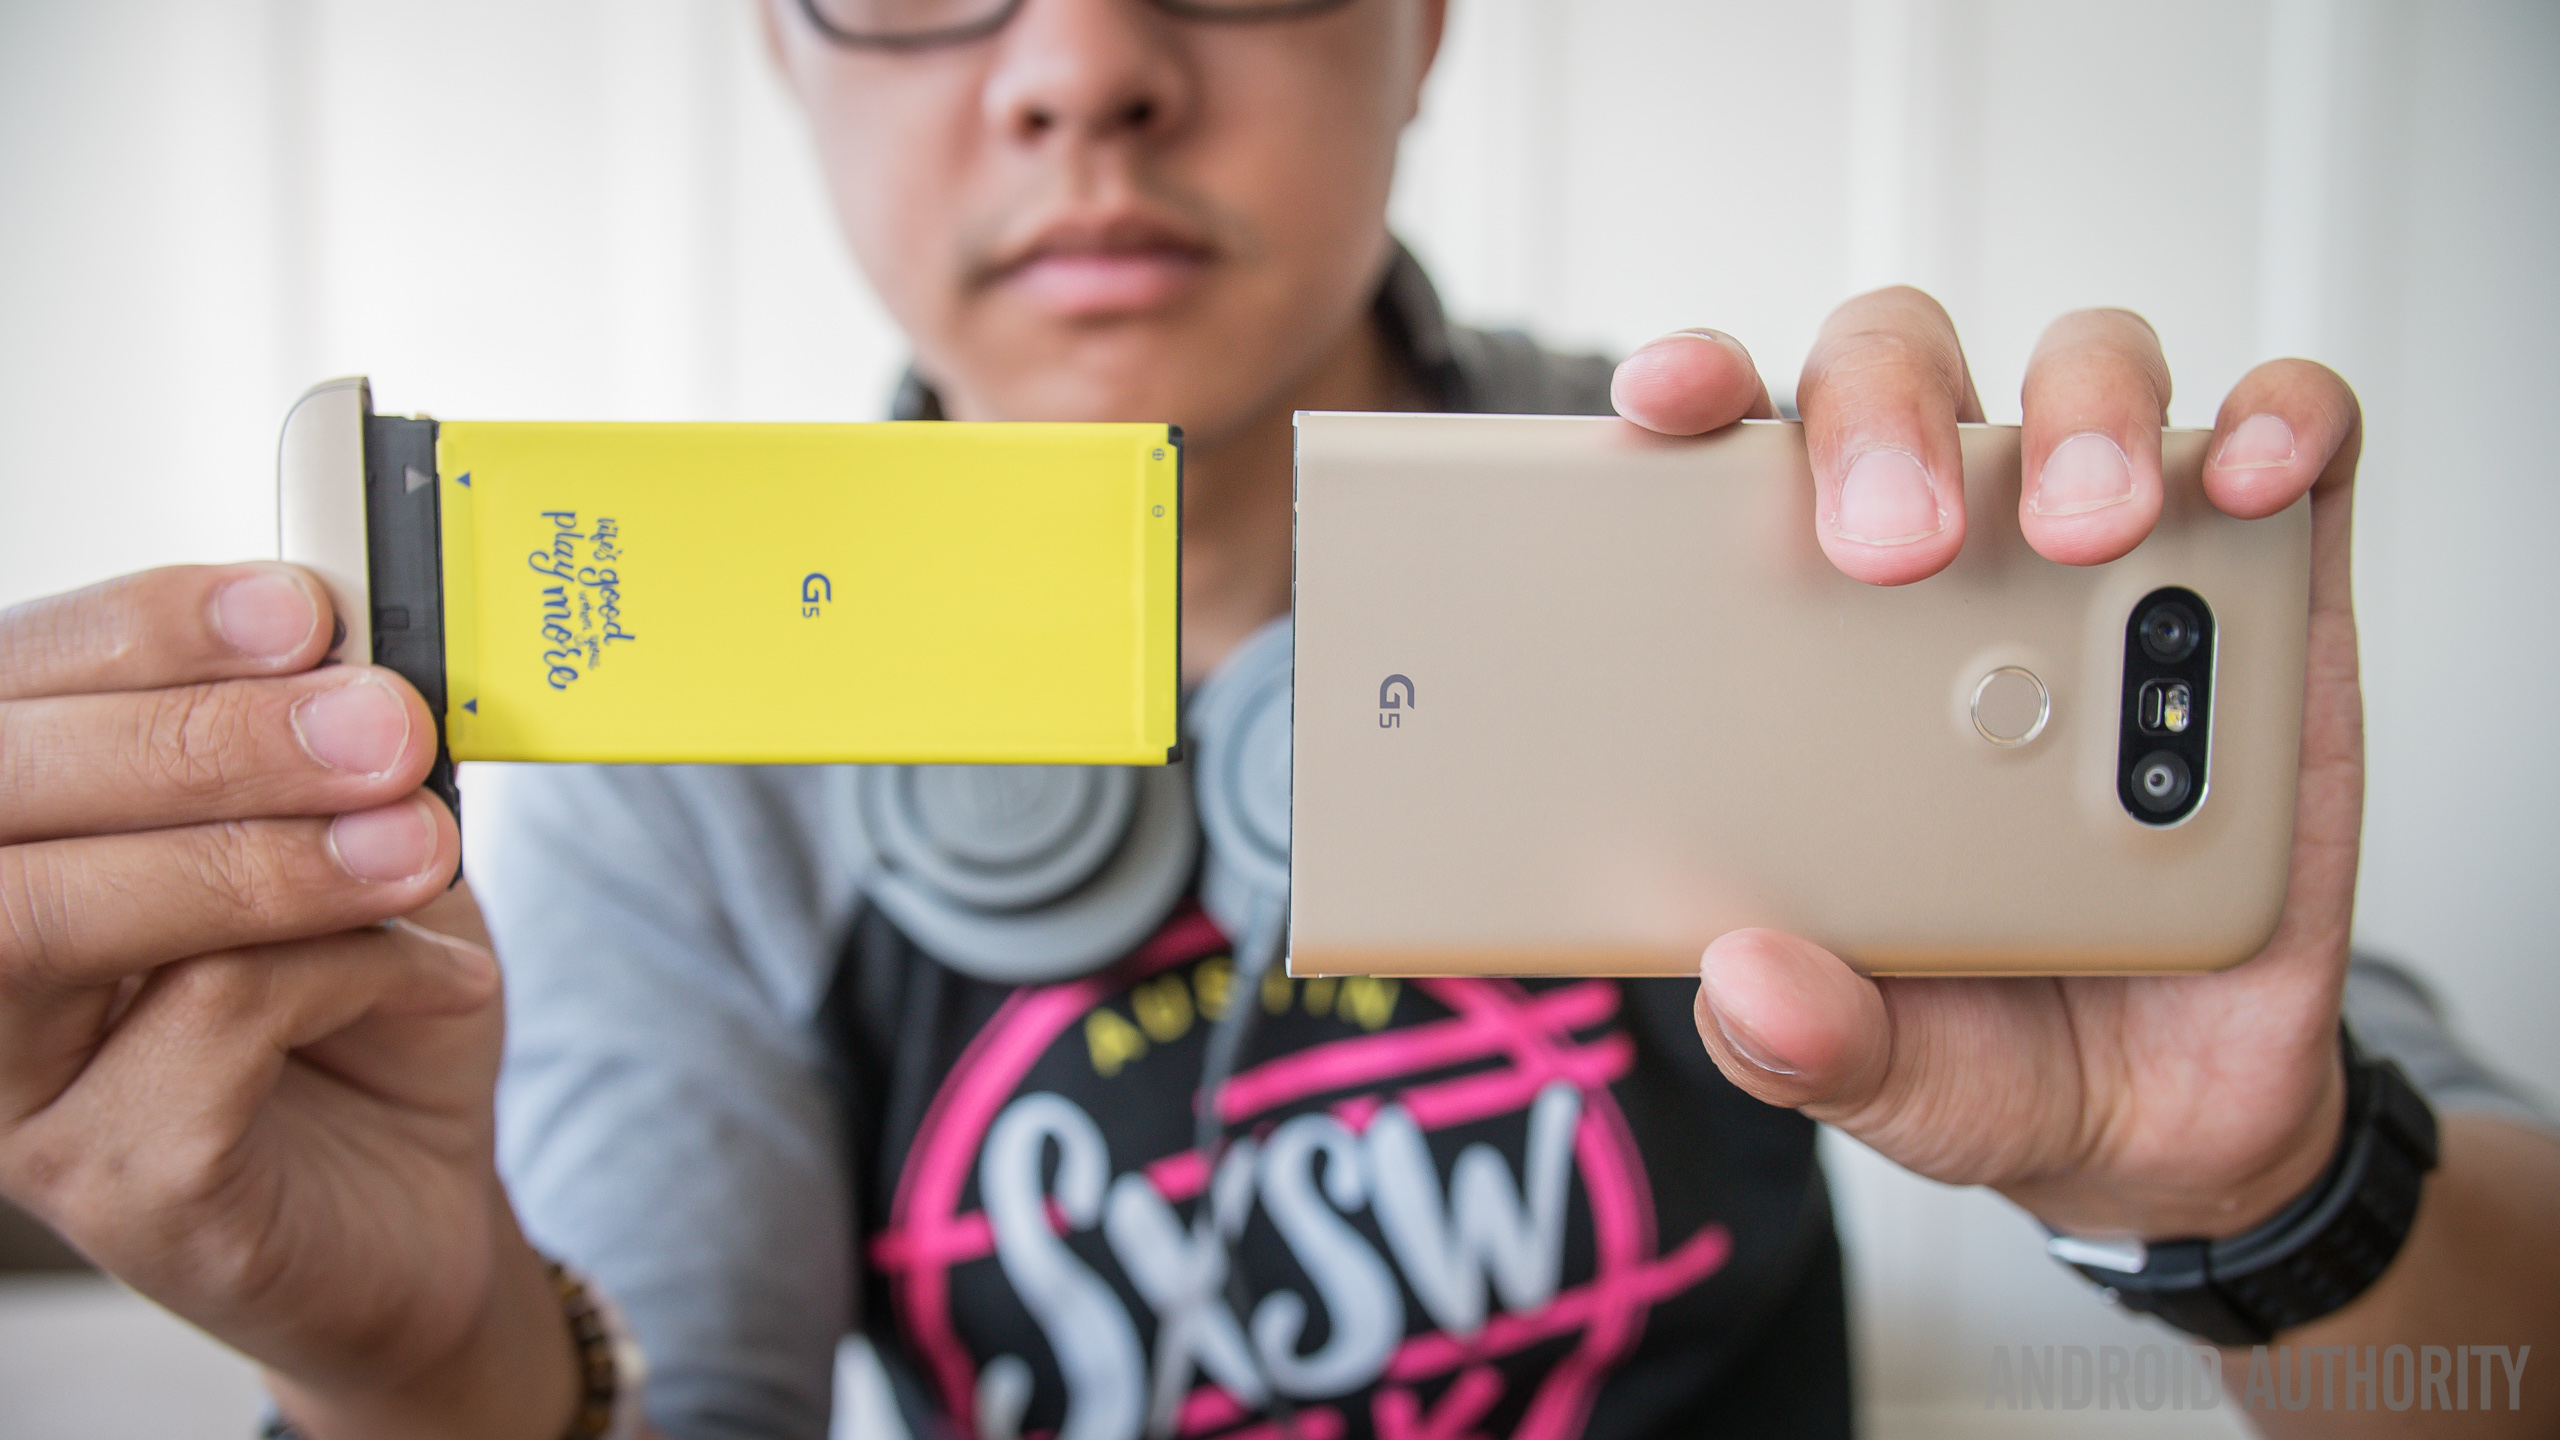 lg g5 pre-pro vs iphone 6s (17 of 32)